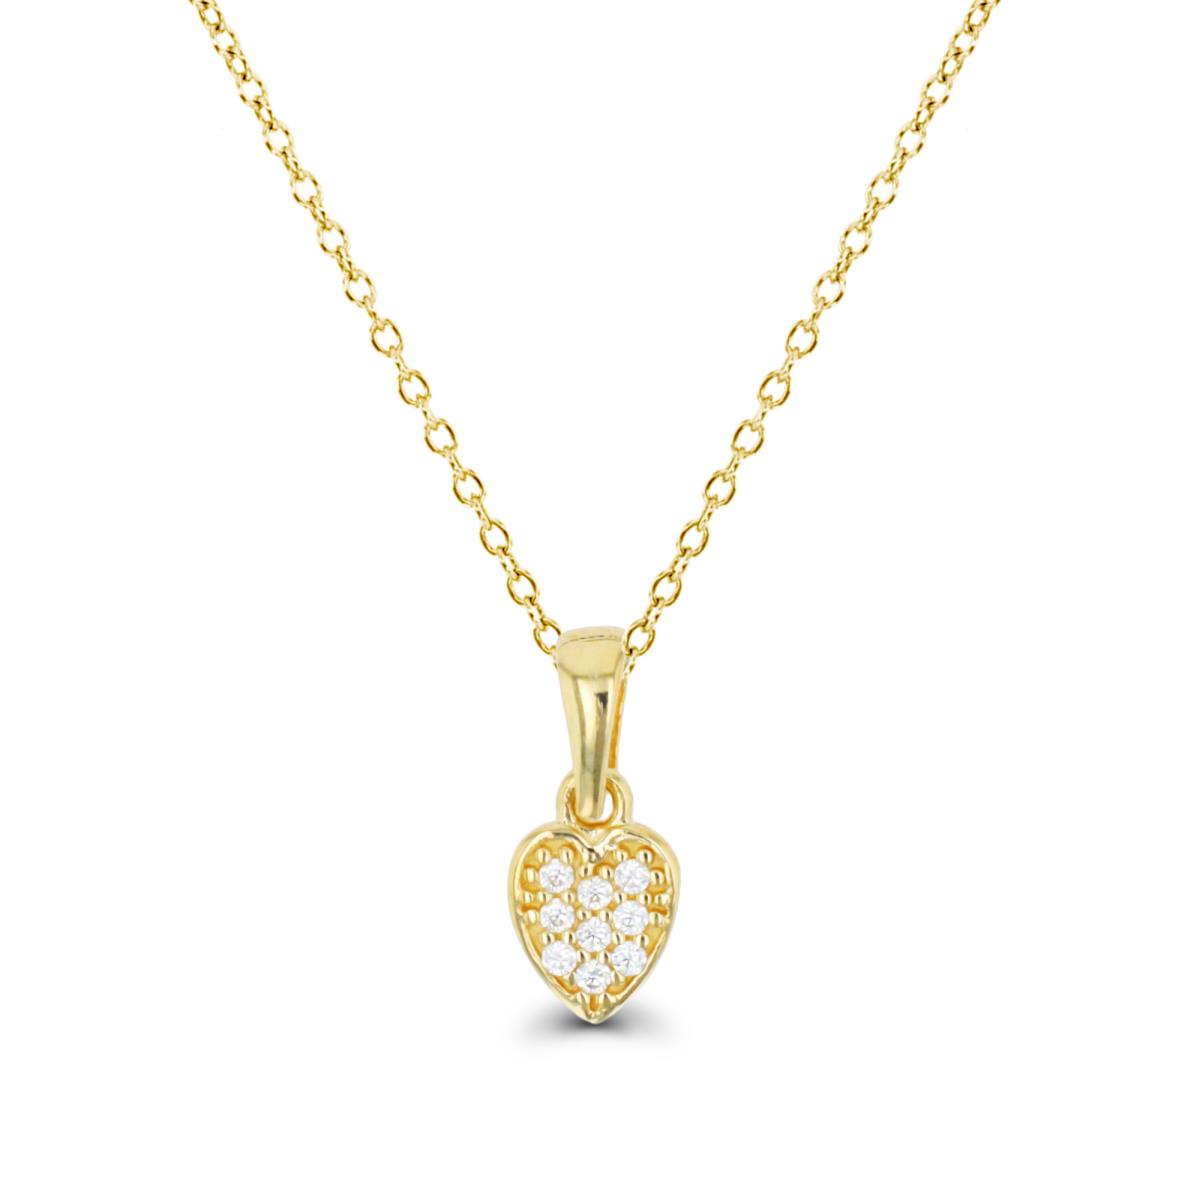 10K Yellow Gold Petite Heart 18" Necklace